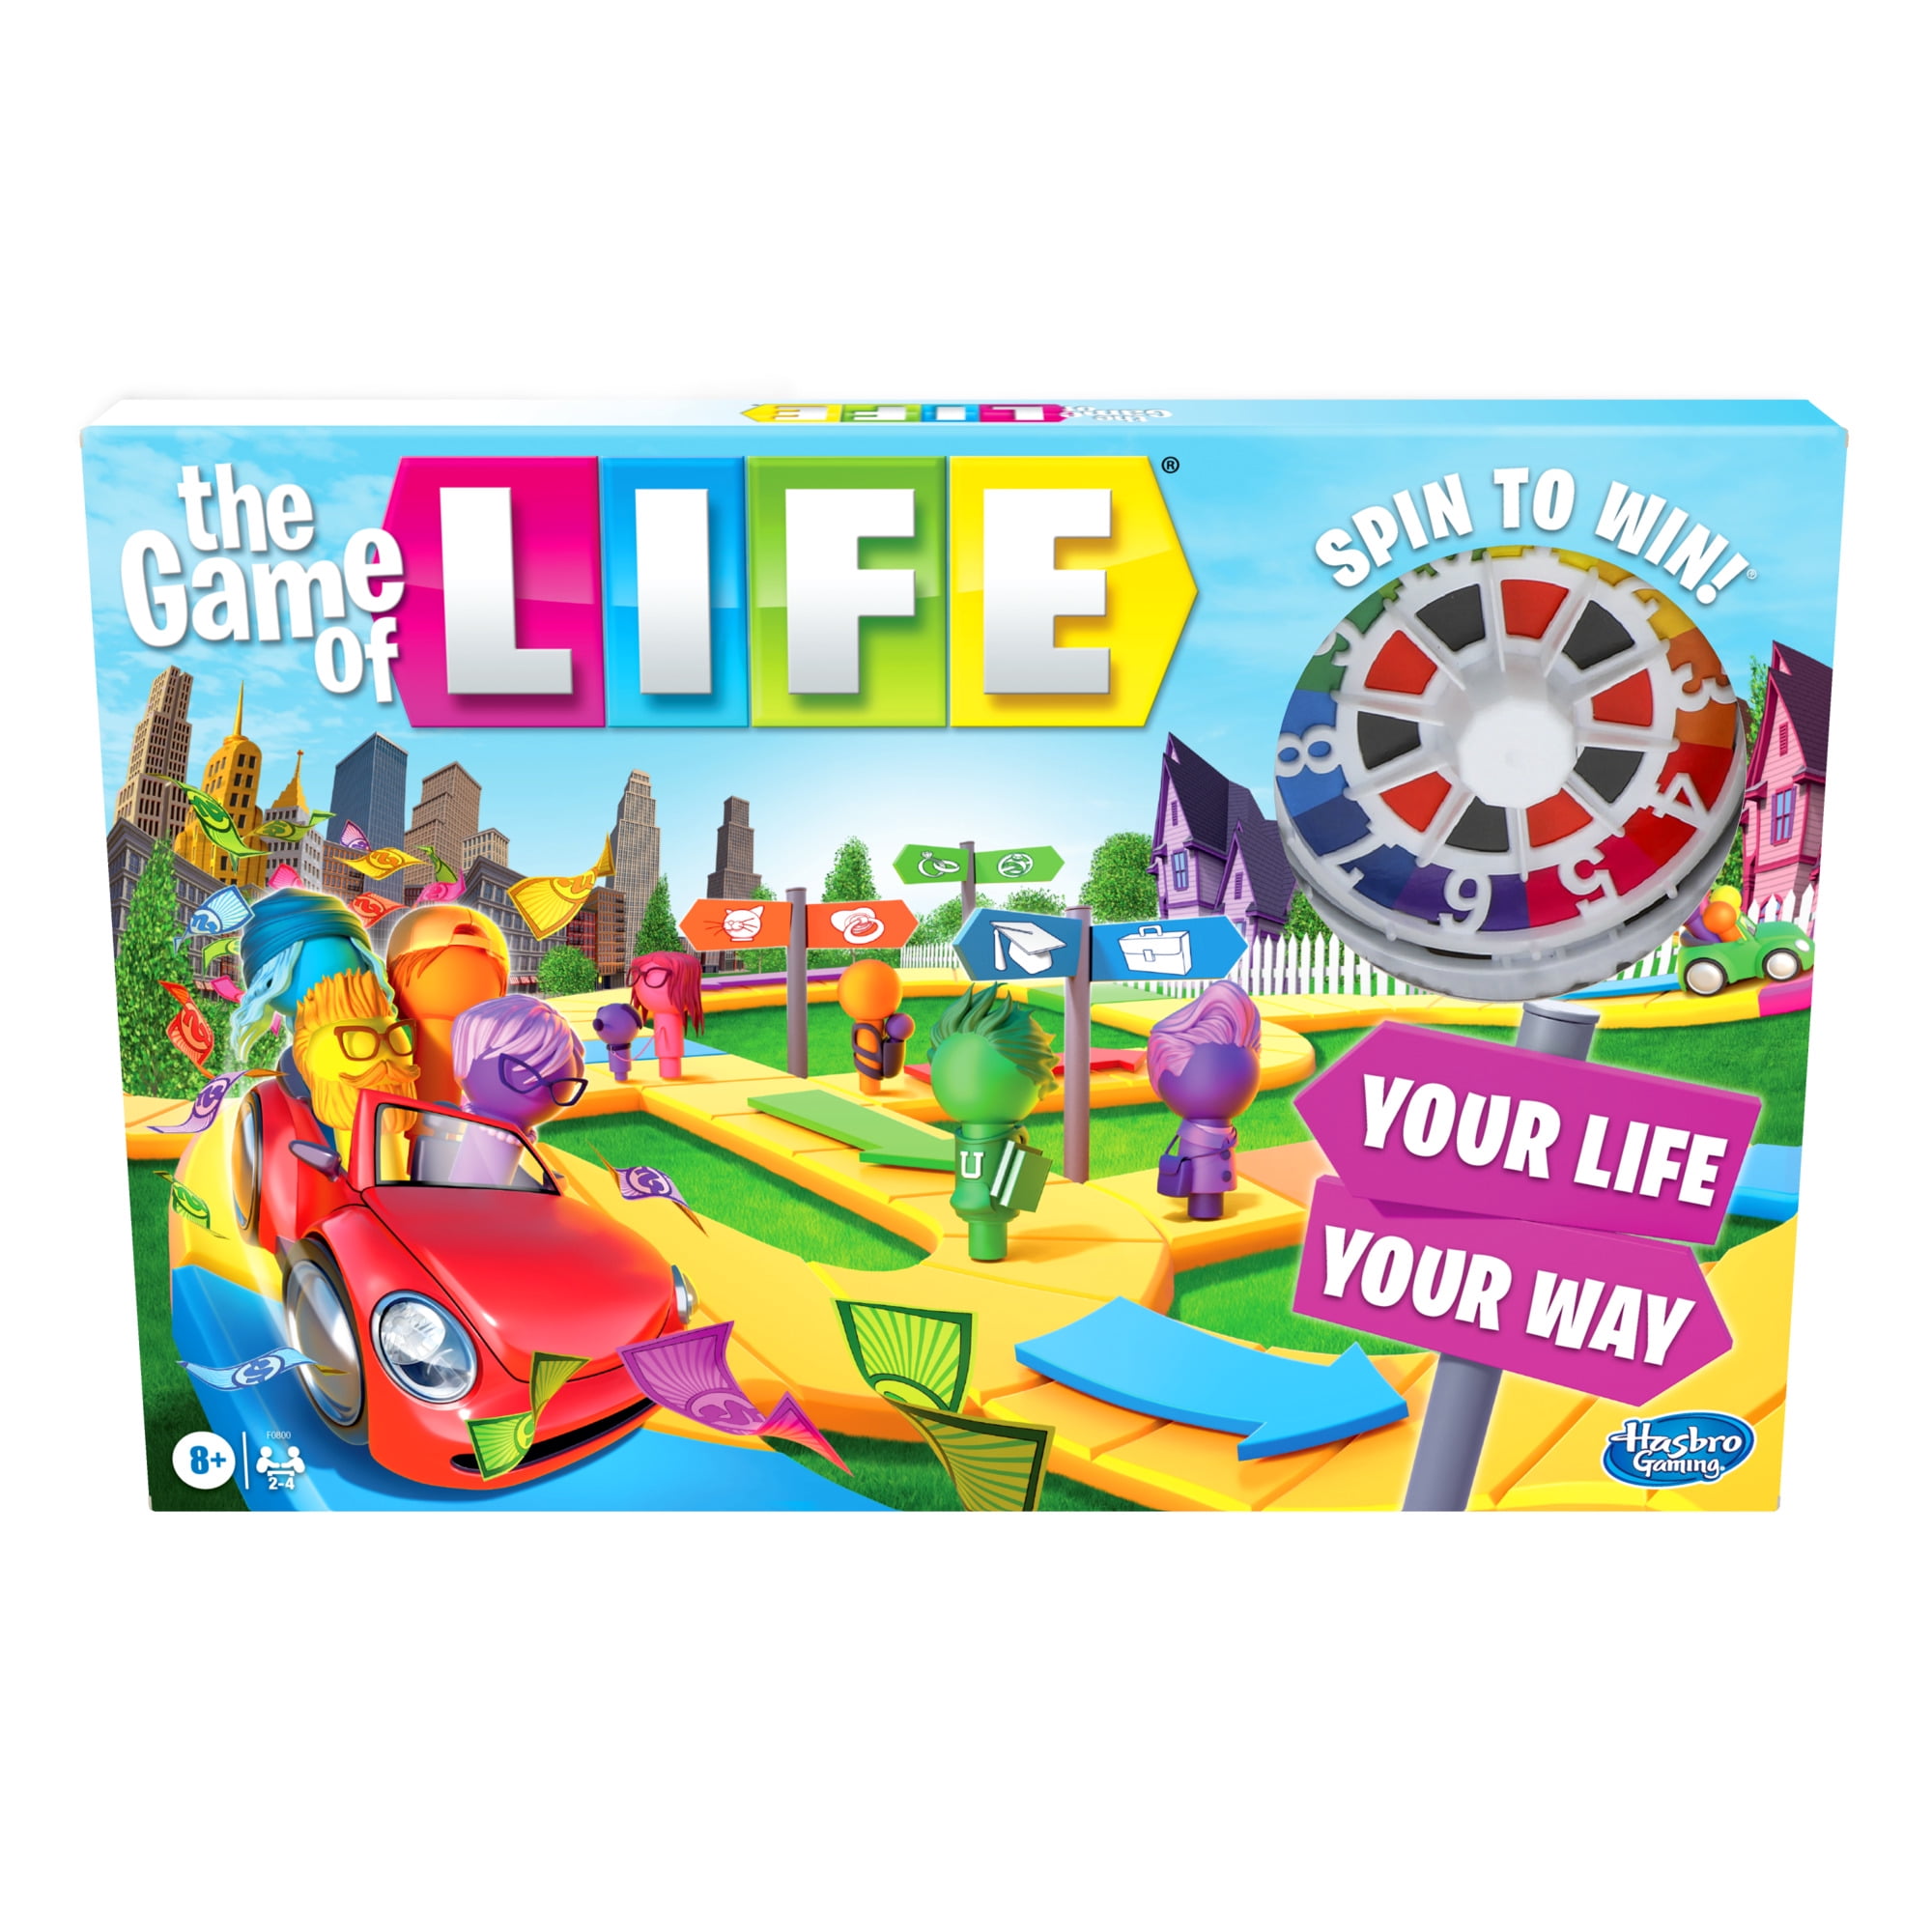 NEW Sealed The Game of LIFE A Day At The Dog Park Pet Edition Board Game 